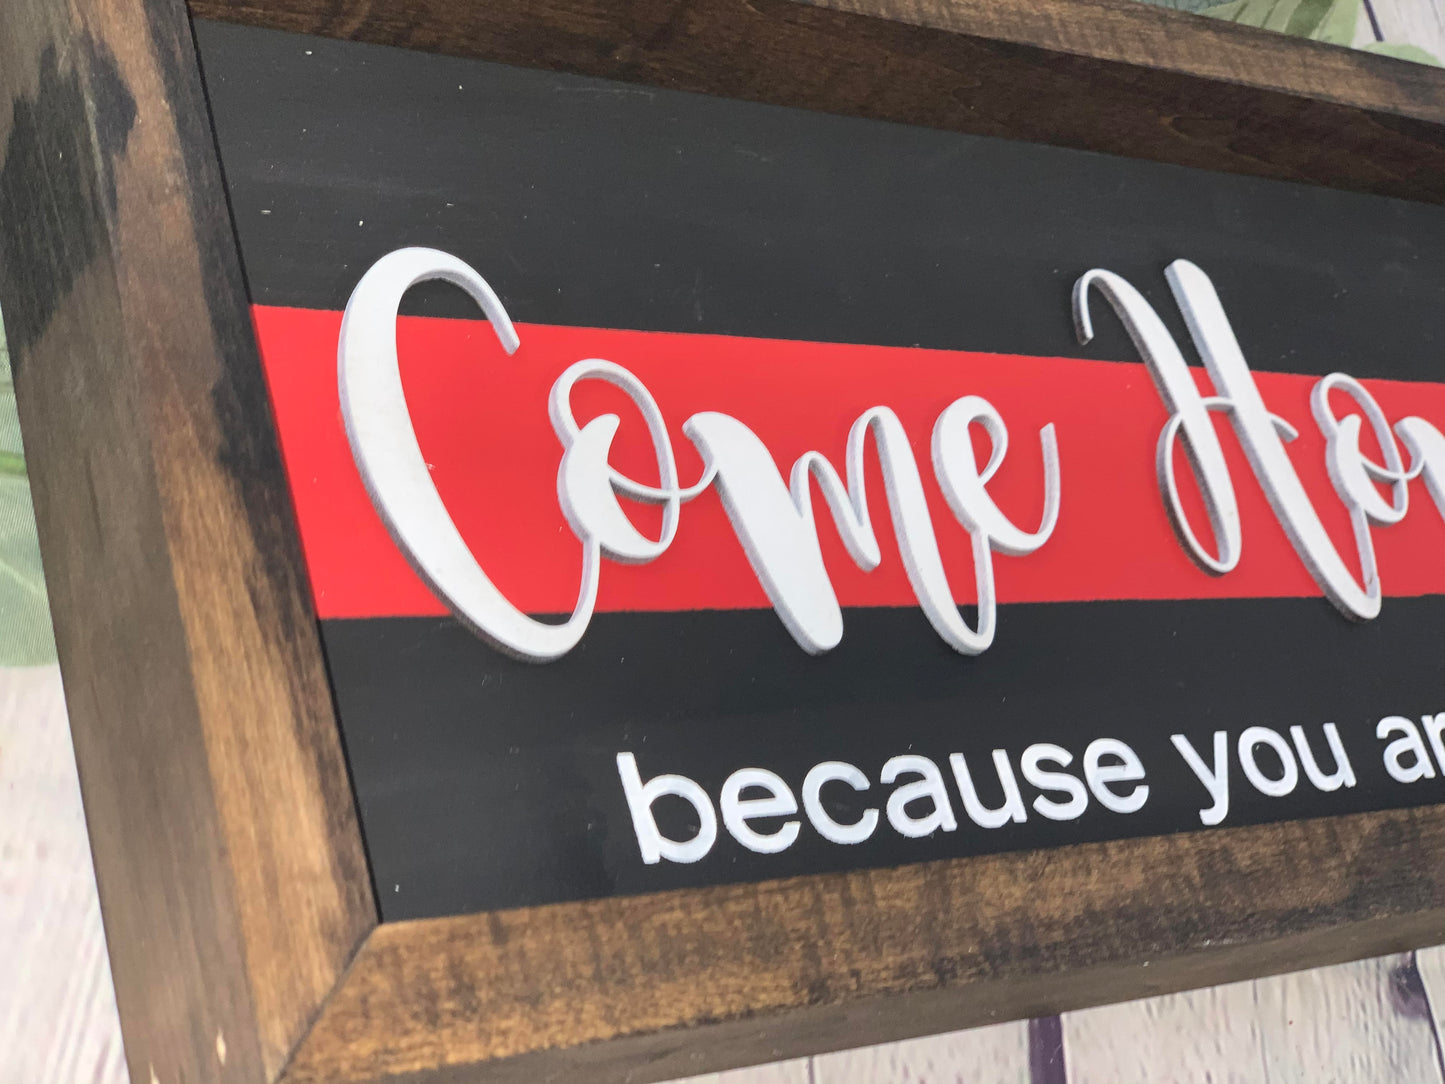 Come Home Safe You are Everything to Us Sign | Thin Red Line Decor | Firefighter Home Decor